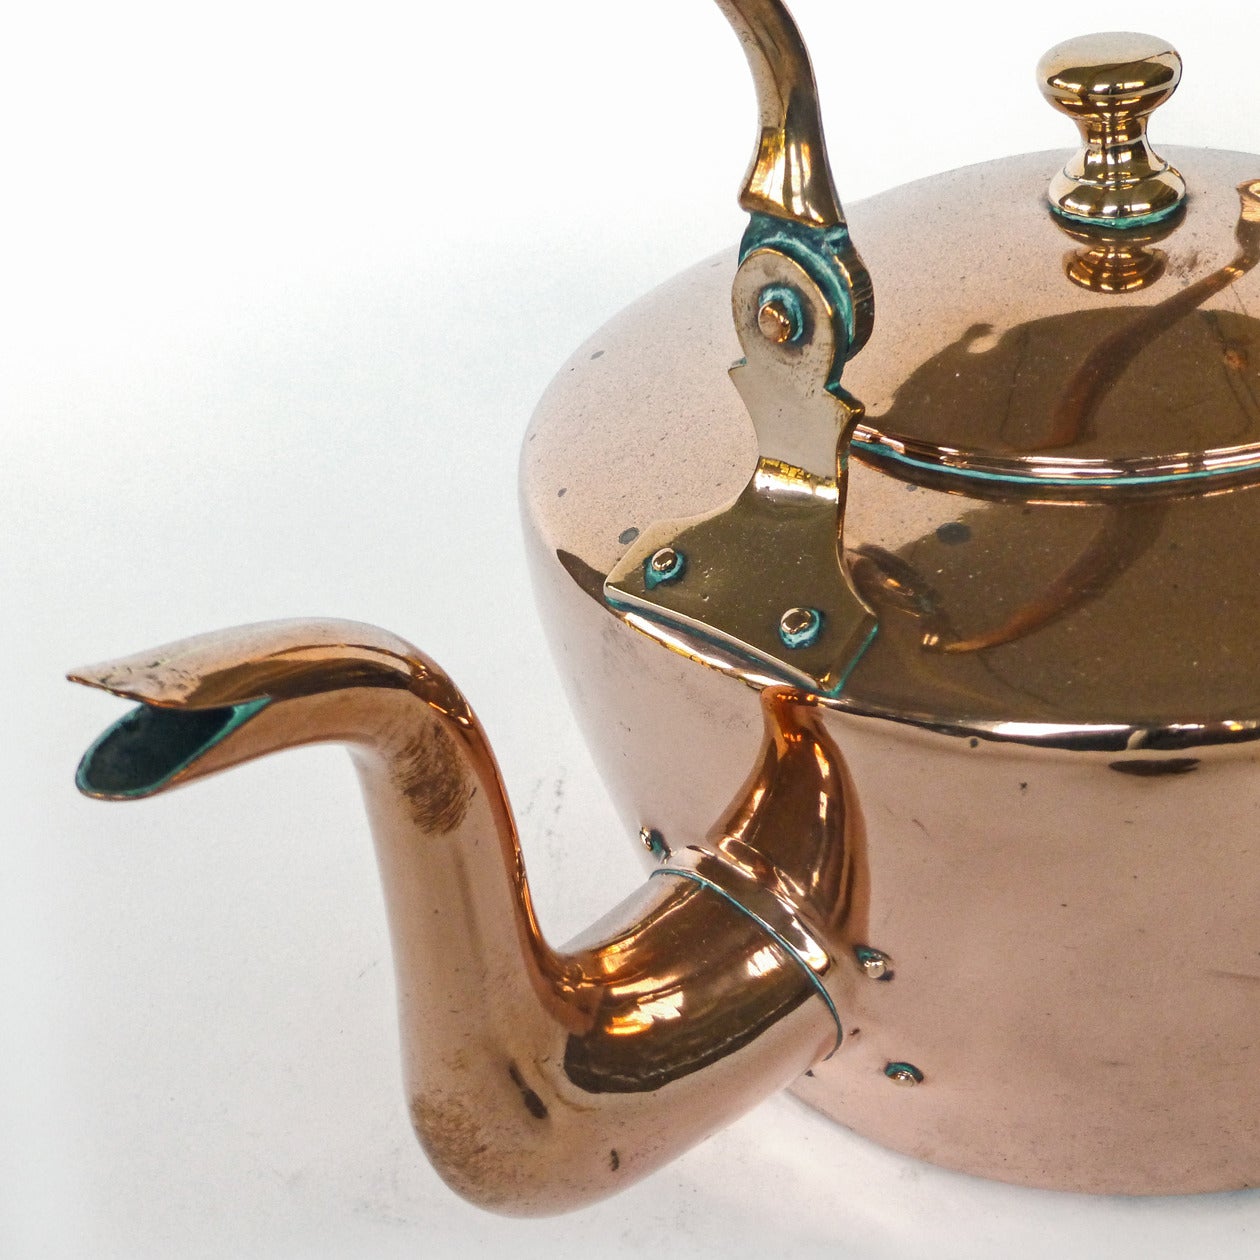 English copper kettle,
circa 1820.
Cast handle.
Dovetailed.